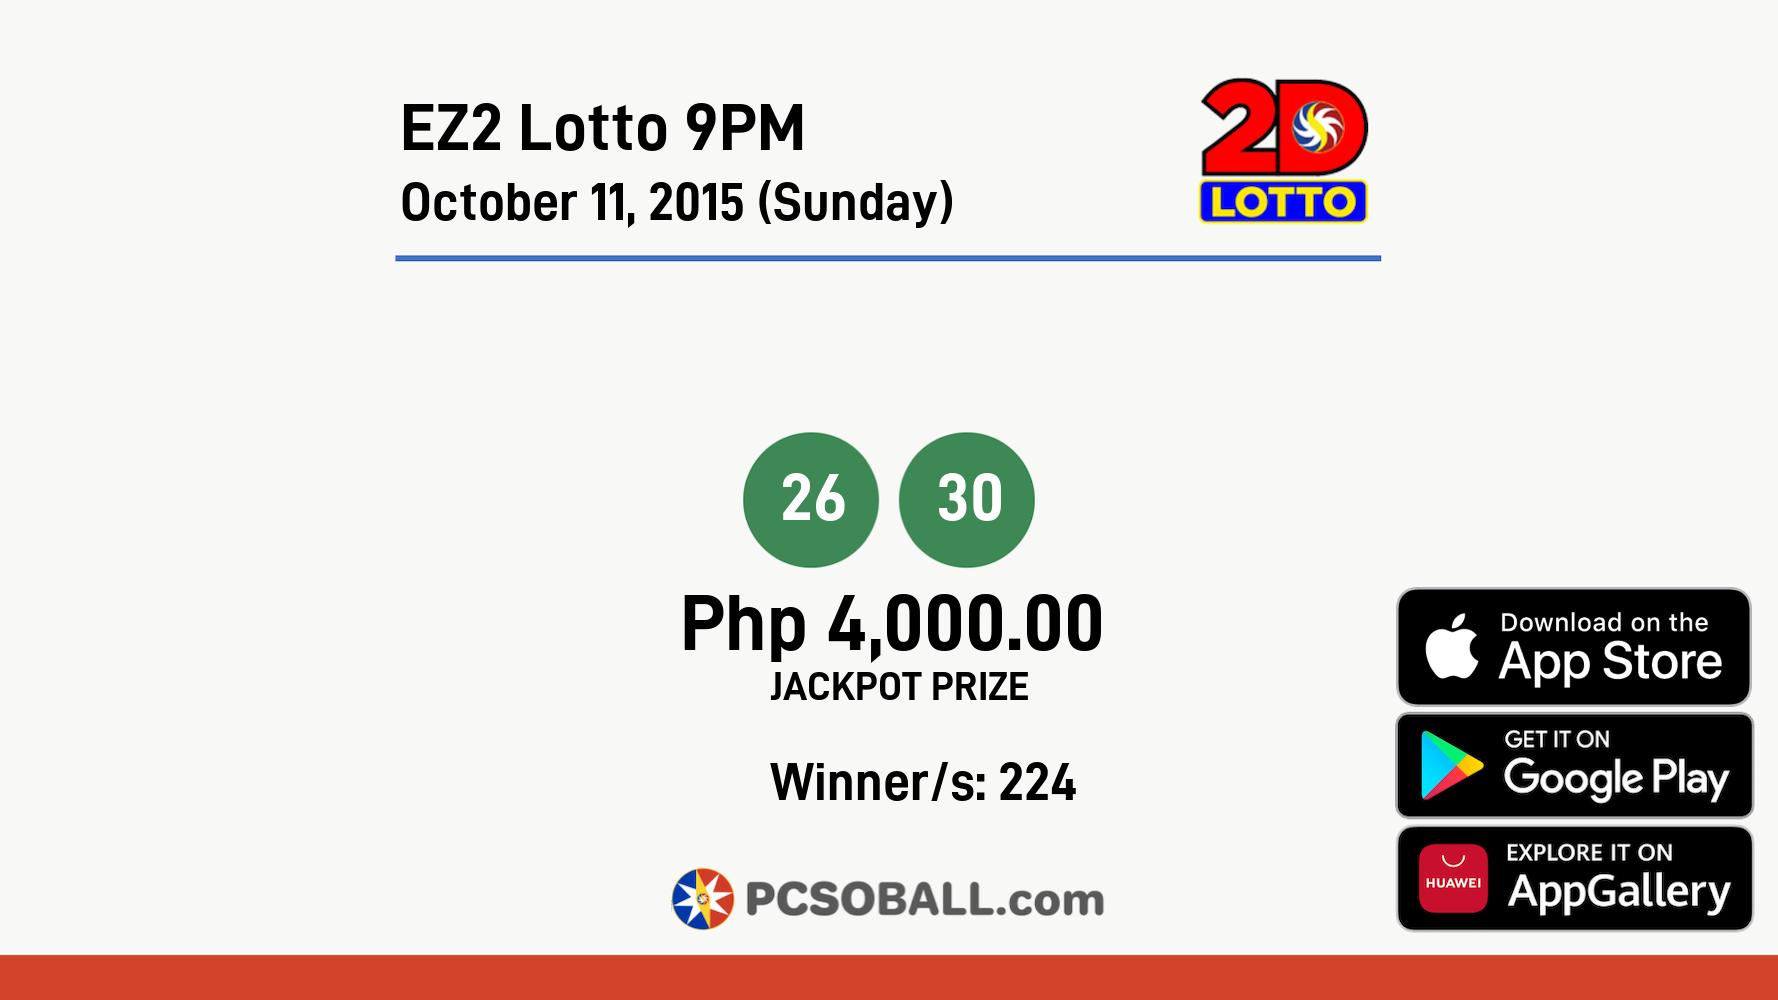 EZ2 Lotto 9PM October 11, 2015 (Sunday) Result